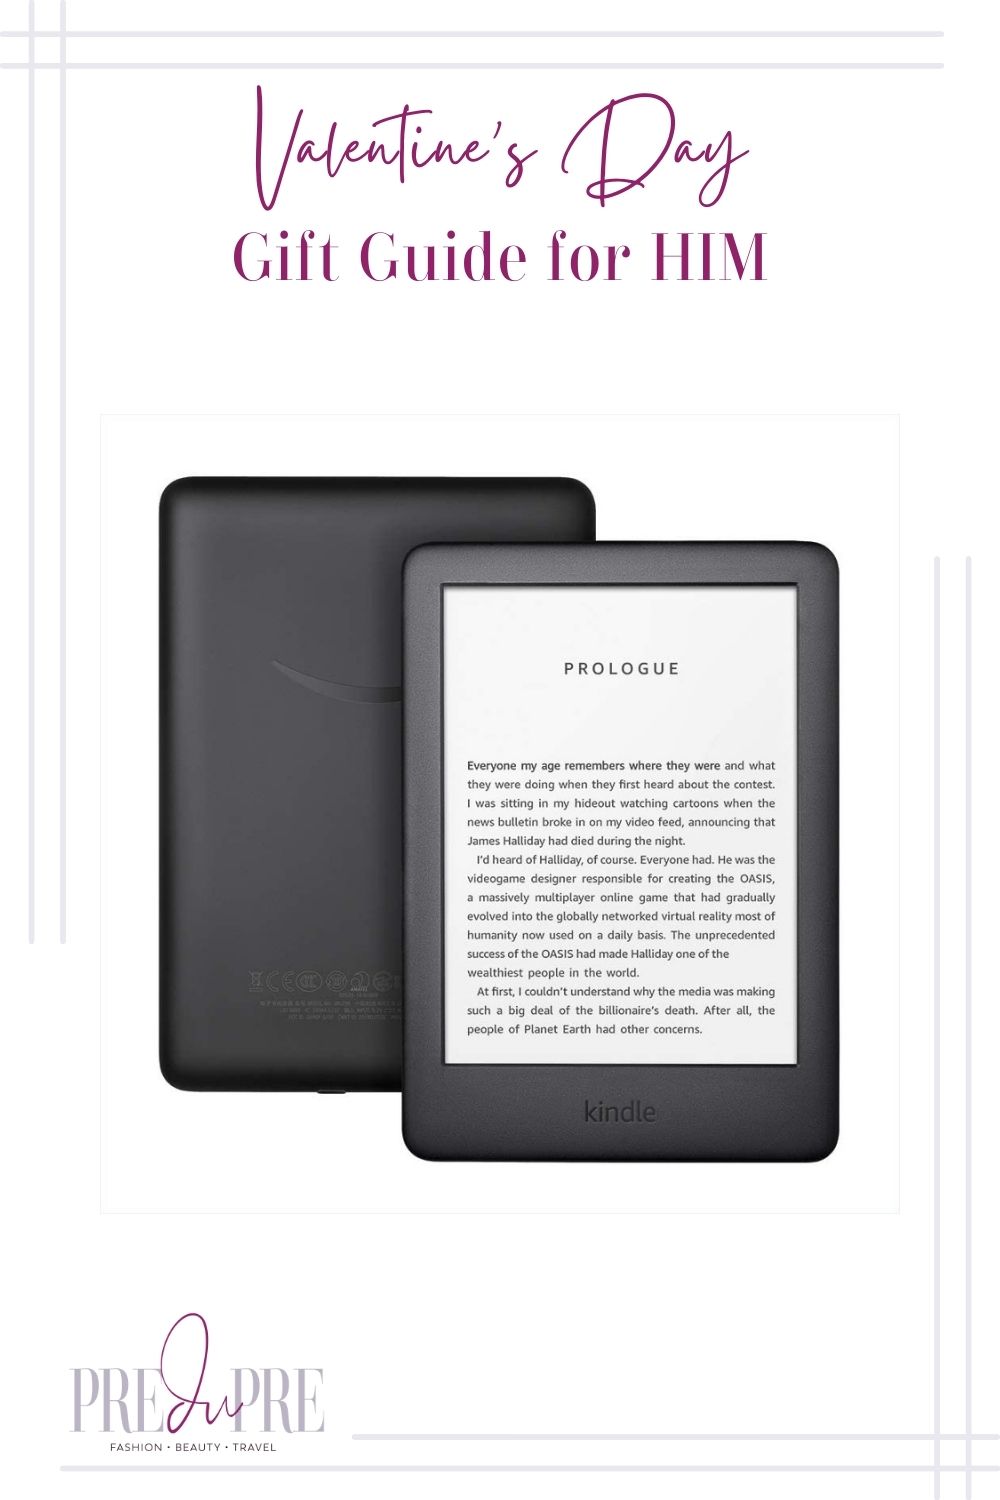 A black Kindle image with text in the center top stating "Valentine's Day Gift Guide for Him."